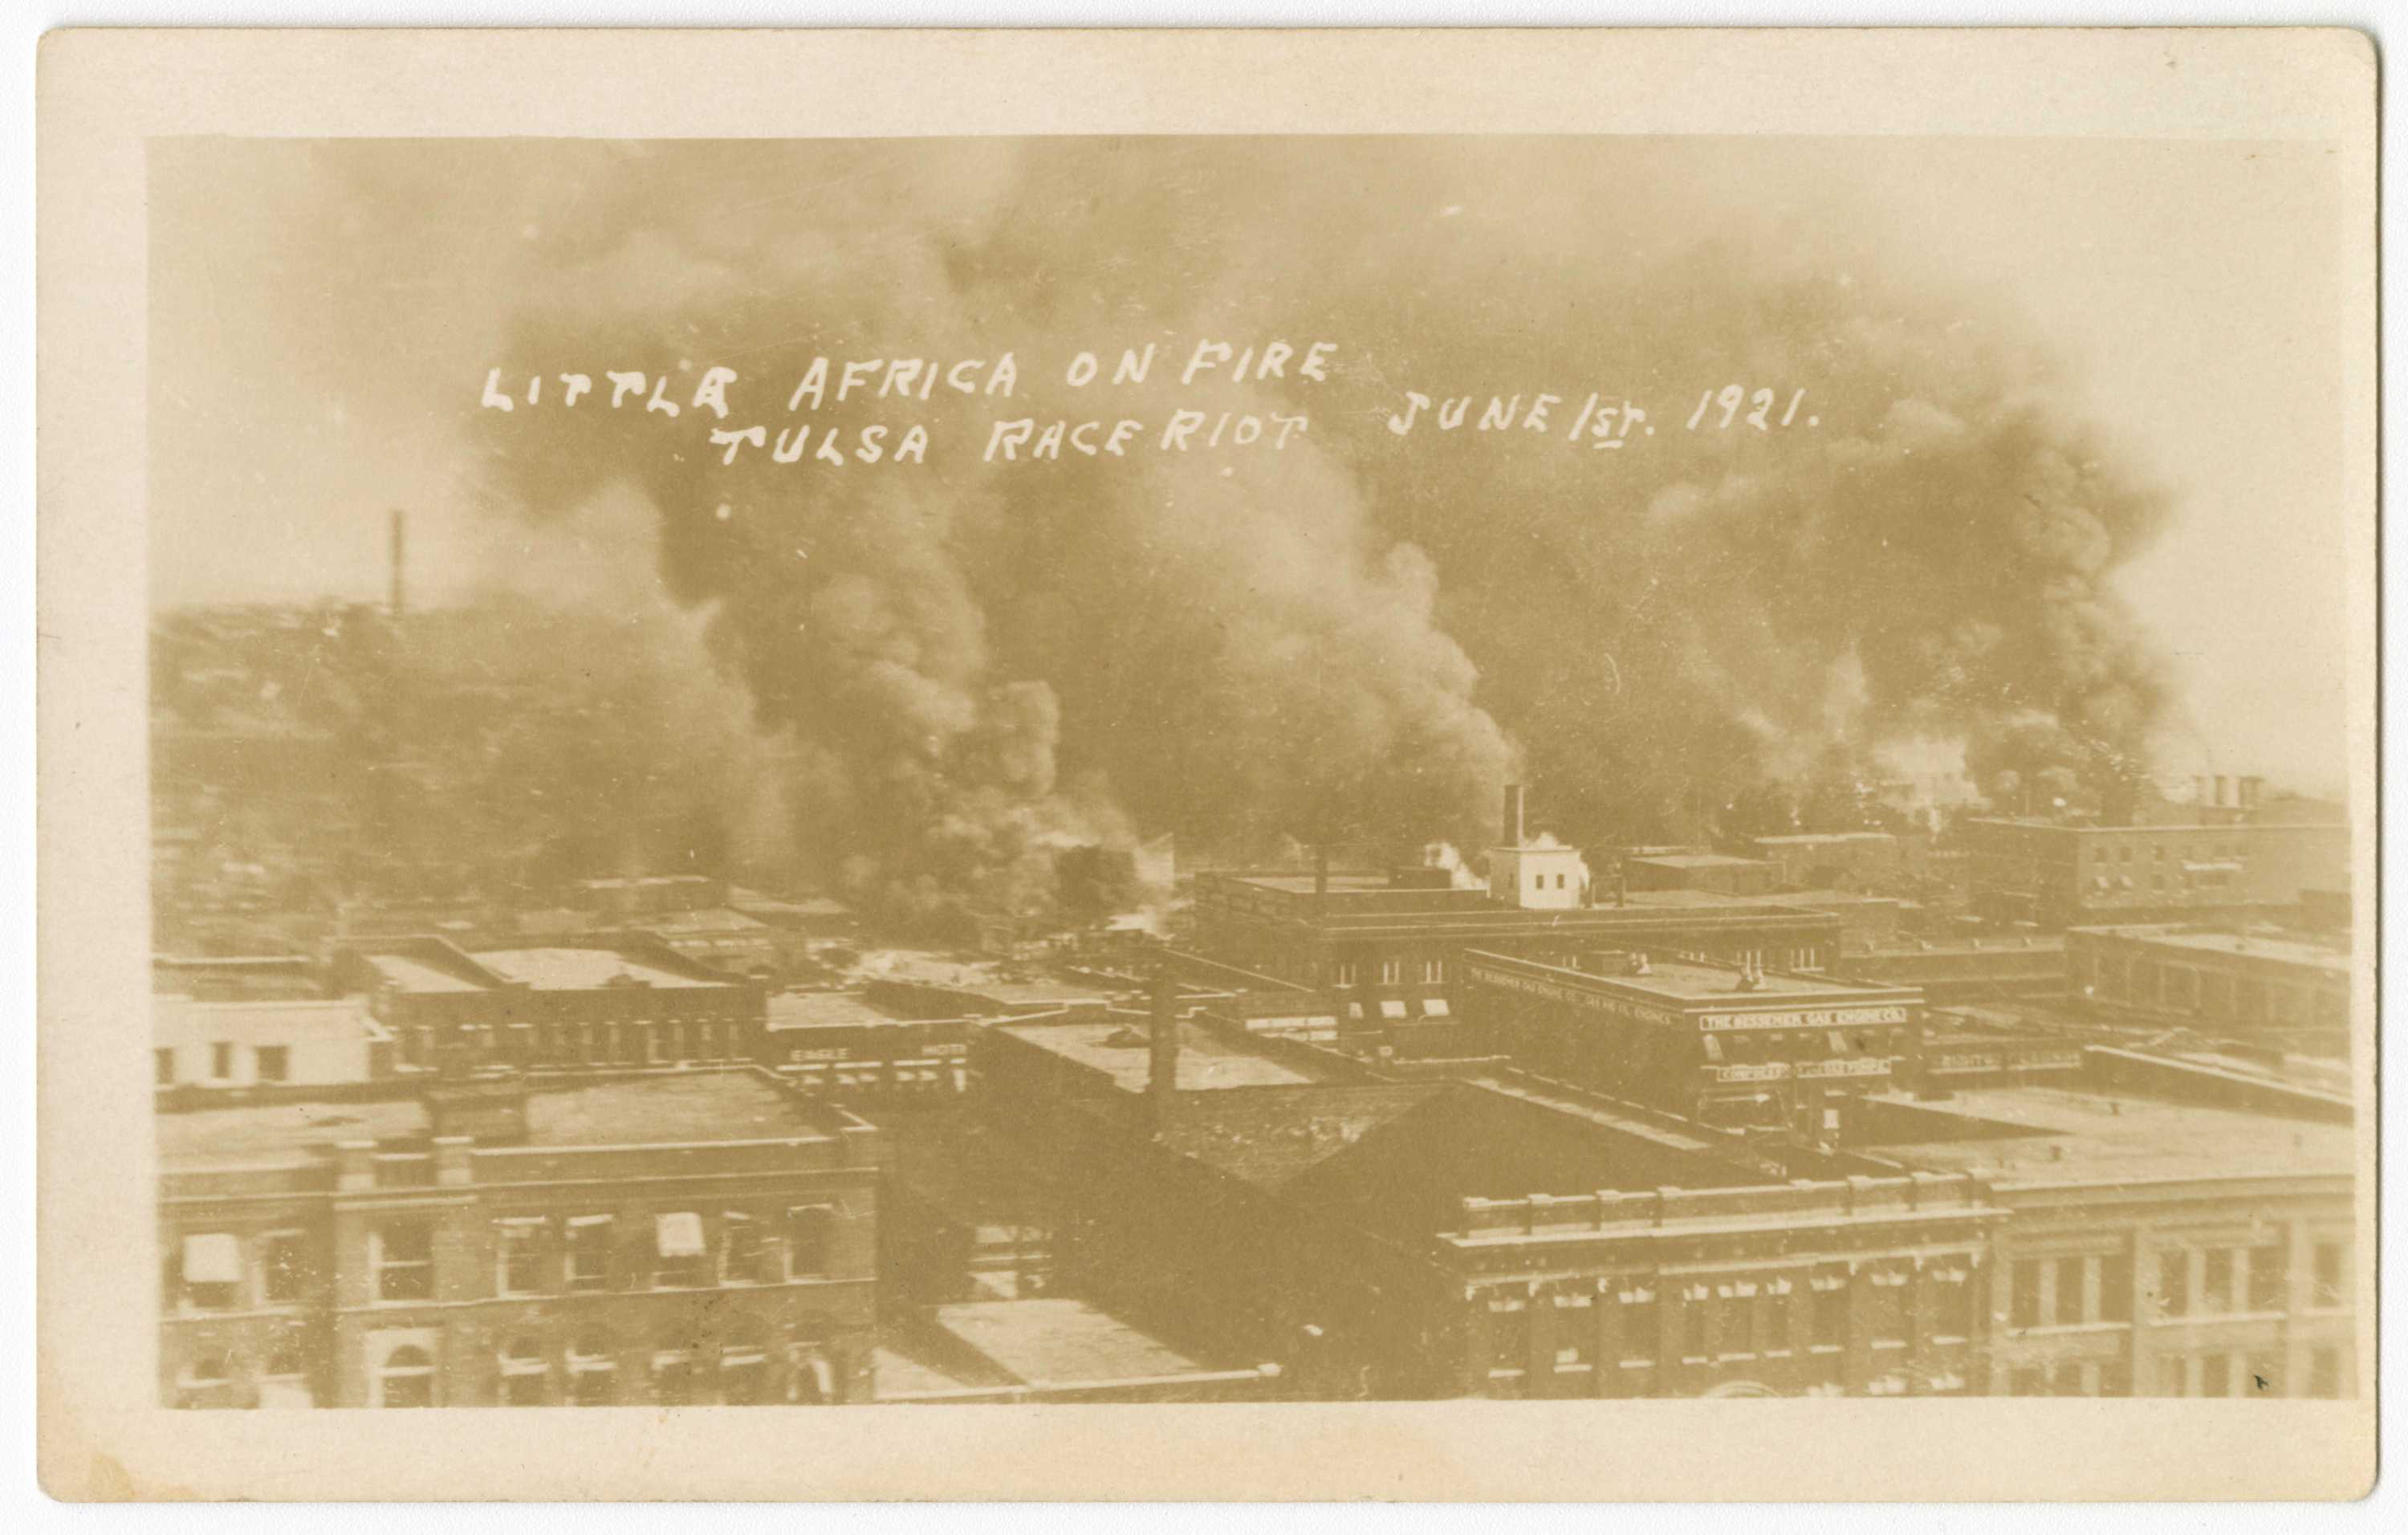 A sepia-toned photographic postcard depicting fires during the Tulsa Race Massacre.